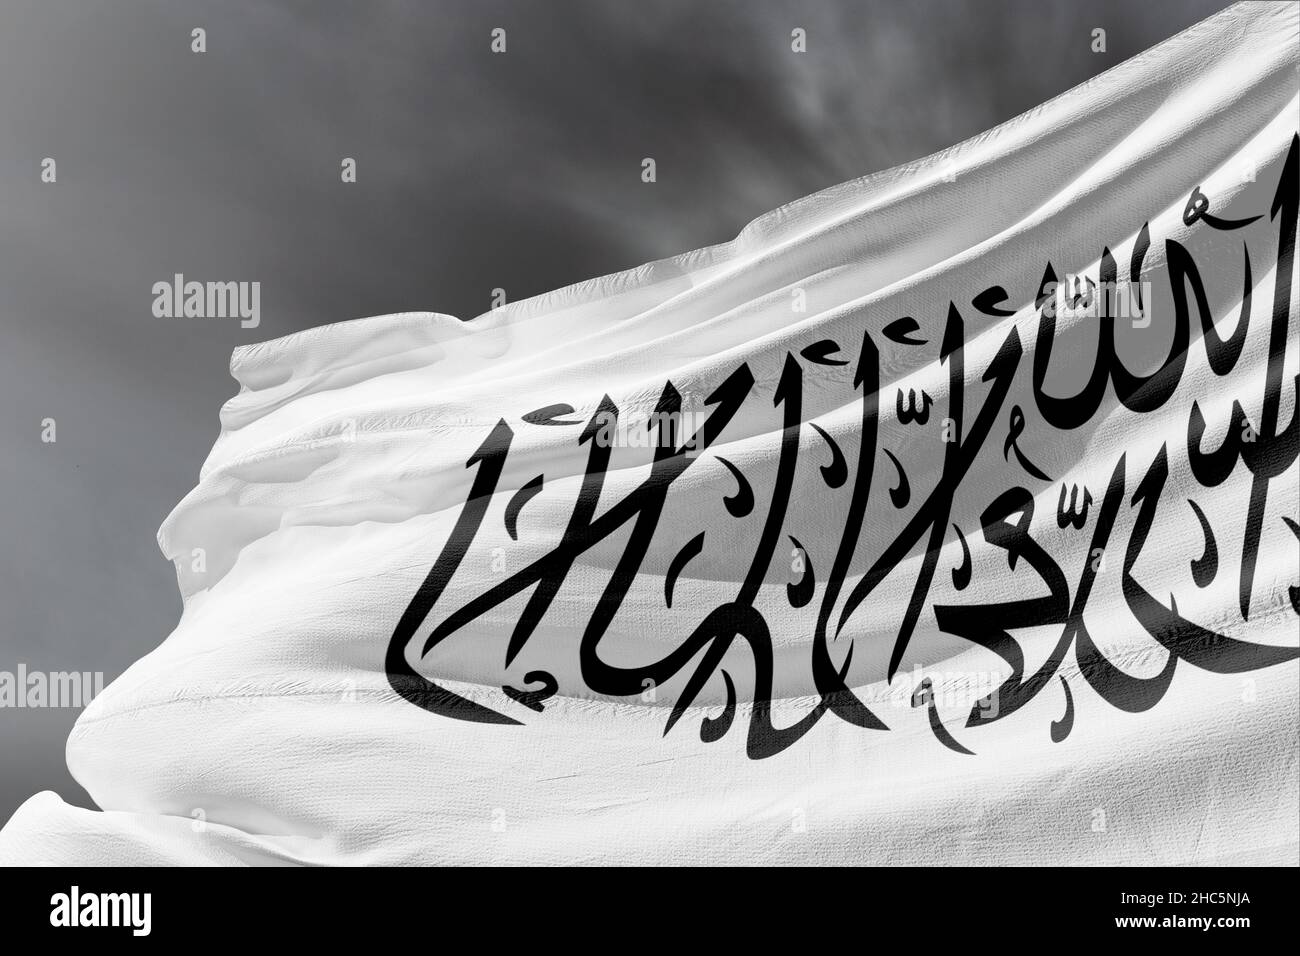 flag of Afghanistan ,Afghanistan in the power of the Taliban. translation inscription "Shahada" is written on the white flag. Stock Photo